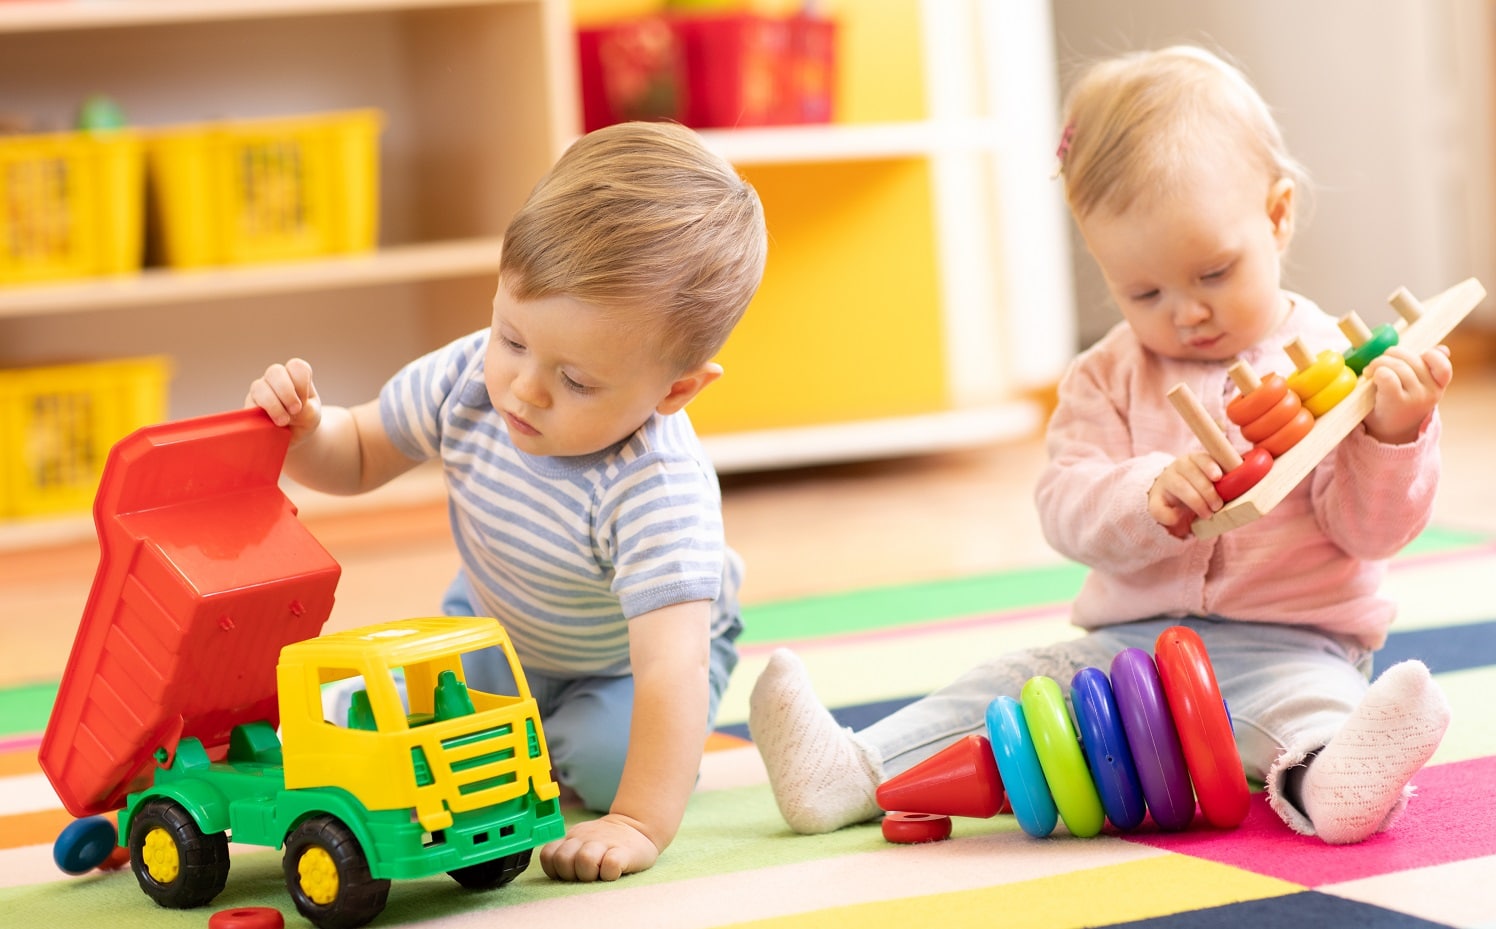 find some games and learning activities for your baby - Find some Games and Learning Activities for your Baby